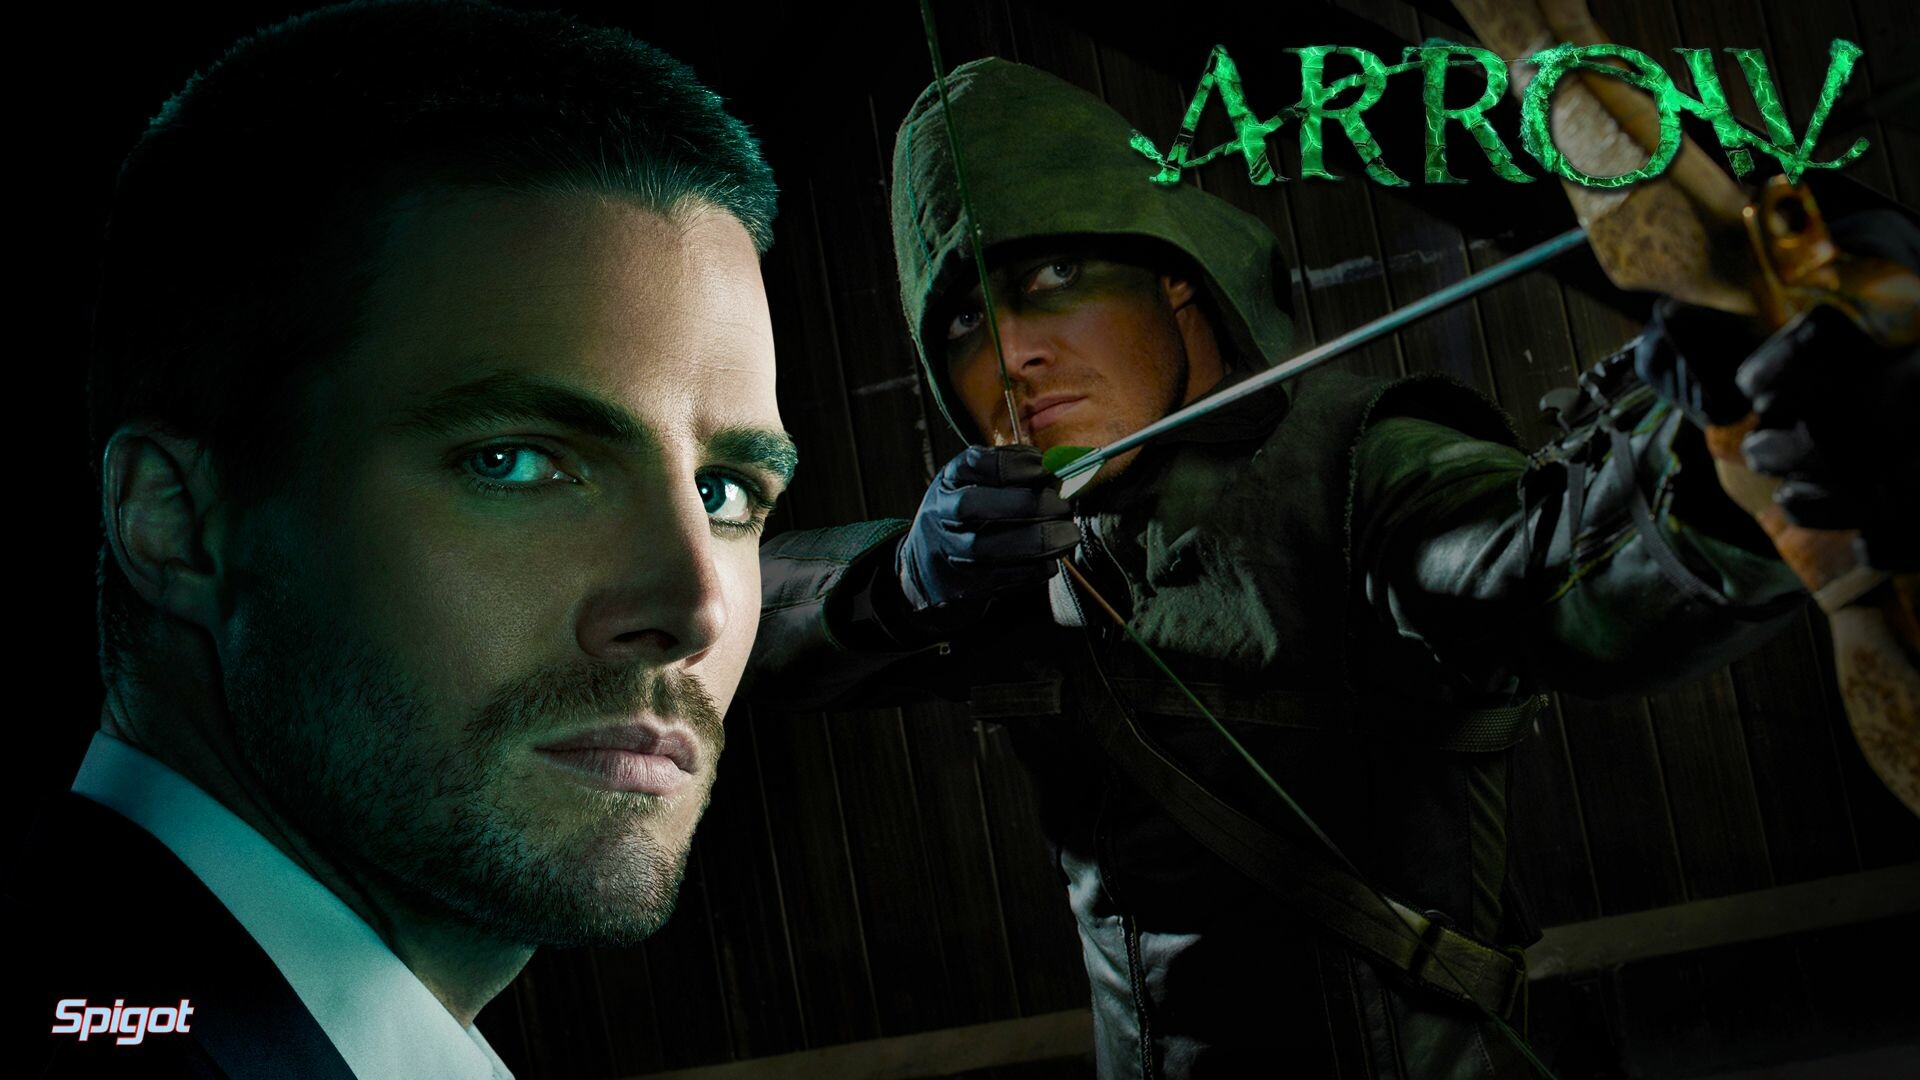 44+ Arrow TV Show Wallpapers: HD, 4K, 5K for PC and Mobile | Download free  images for iPhone, Android